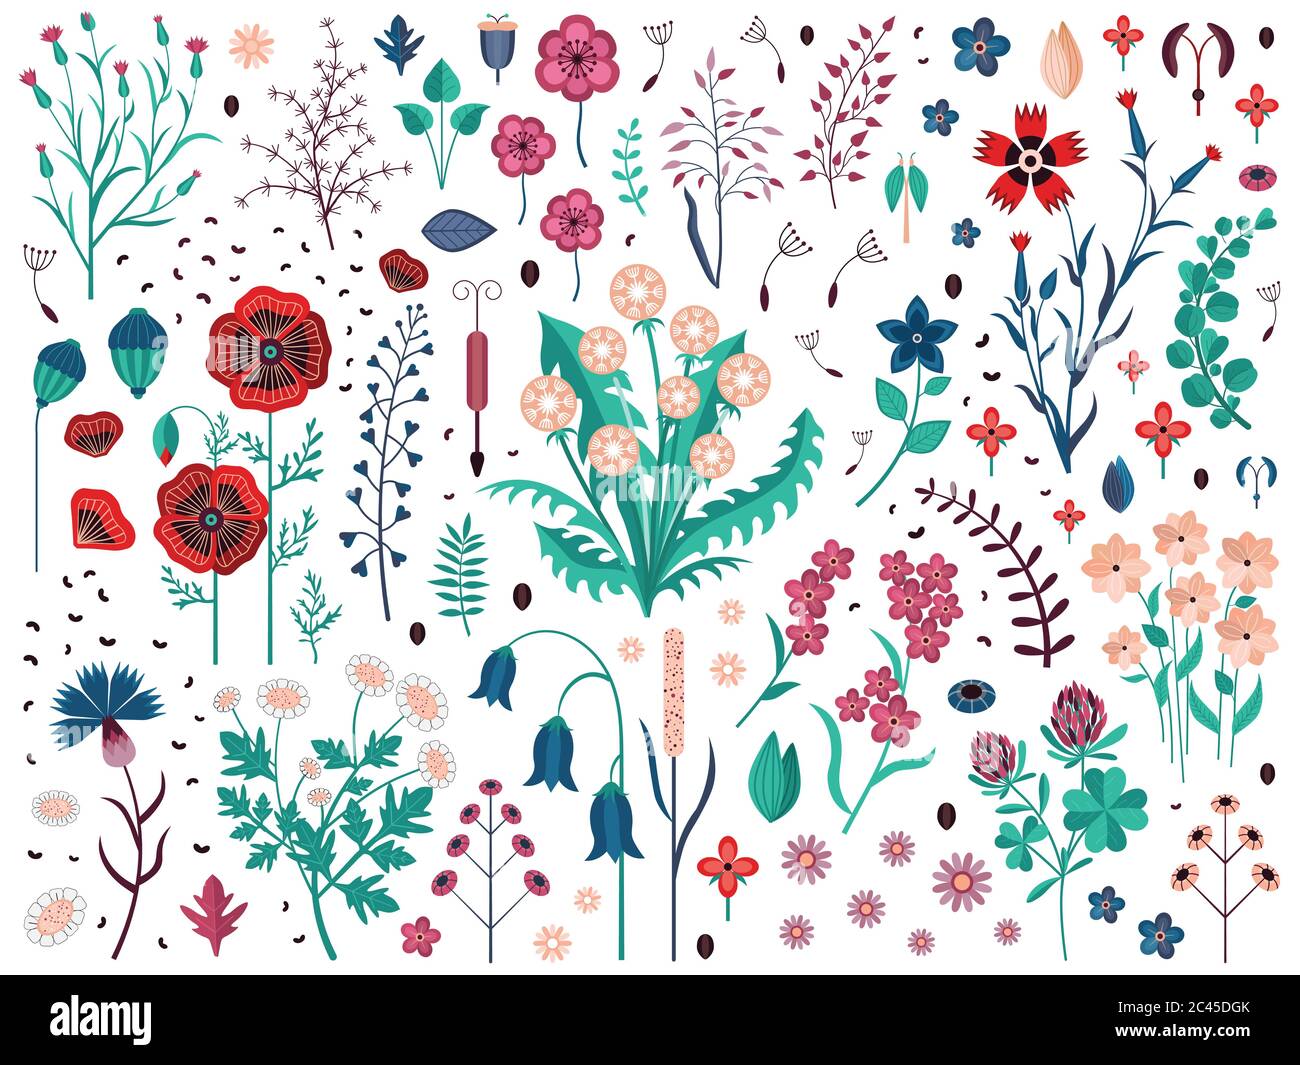 Wild Flowers Herbs and Field Plants Set Stock Vector